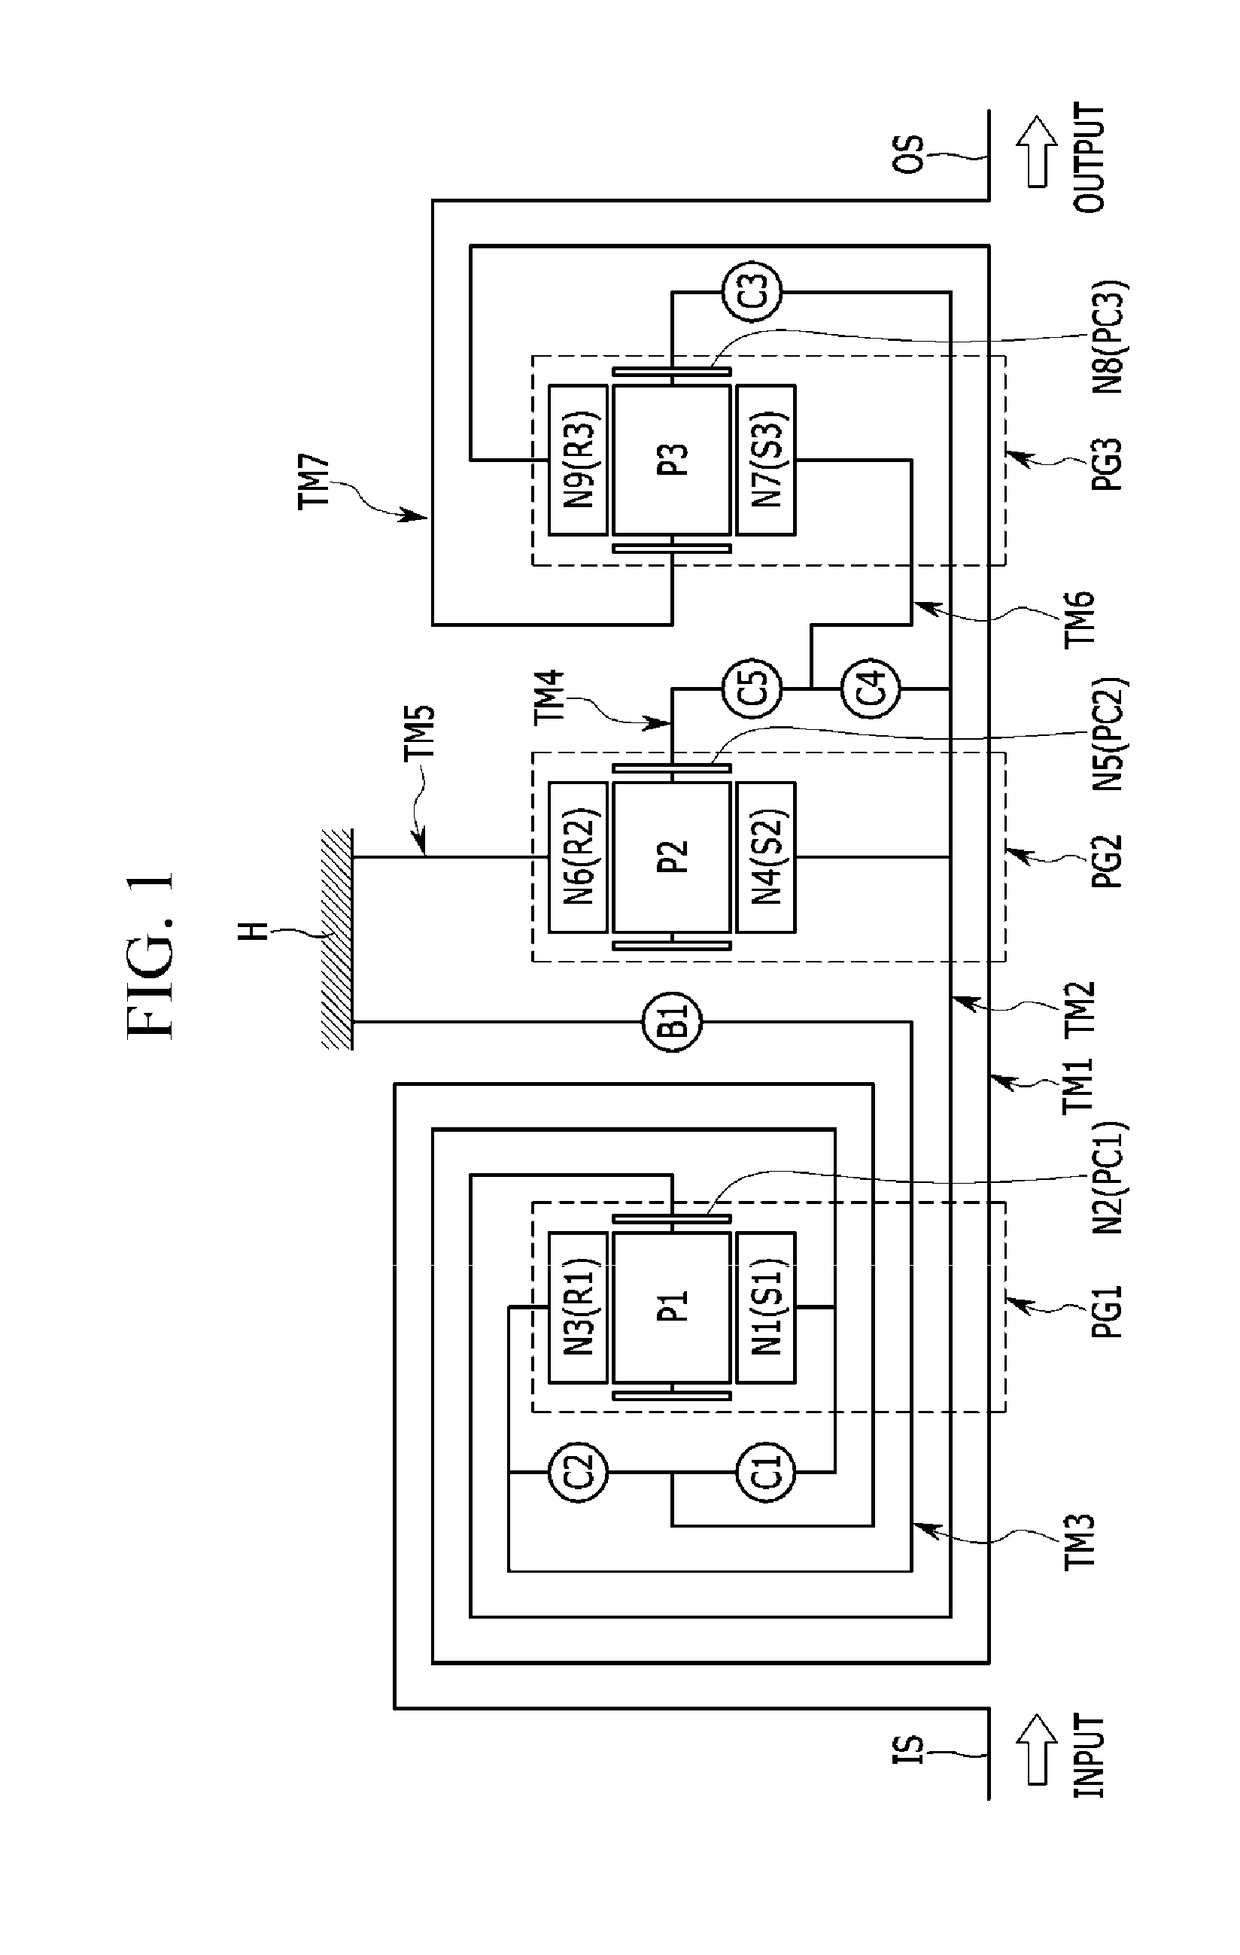 Planetary gear train of automatic transmission for vehicles